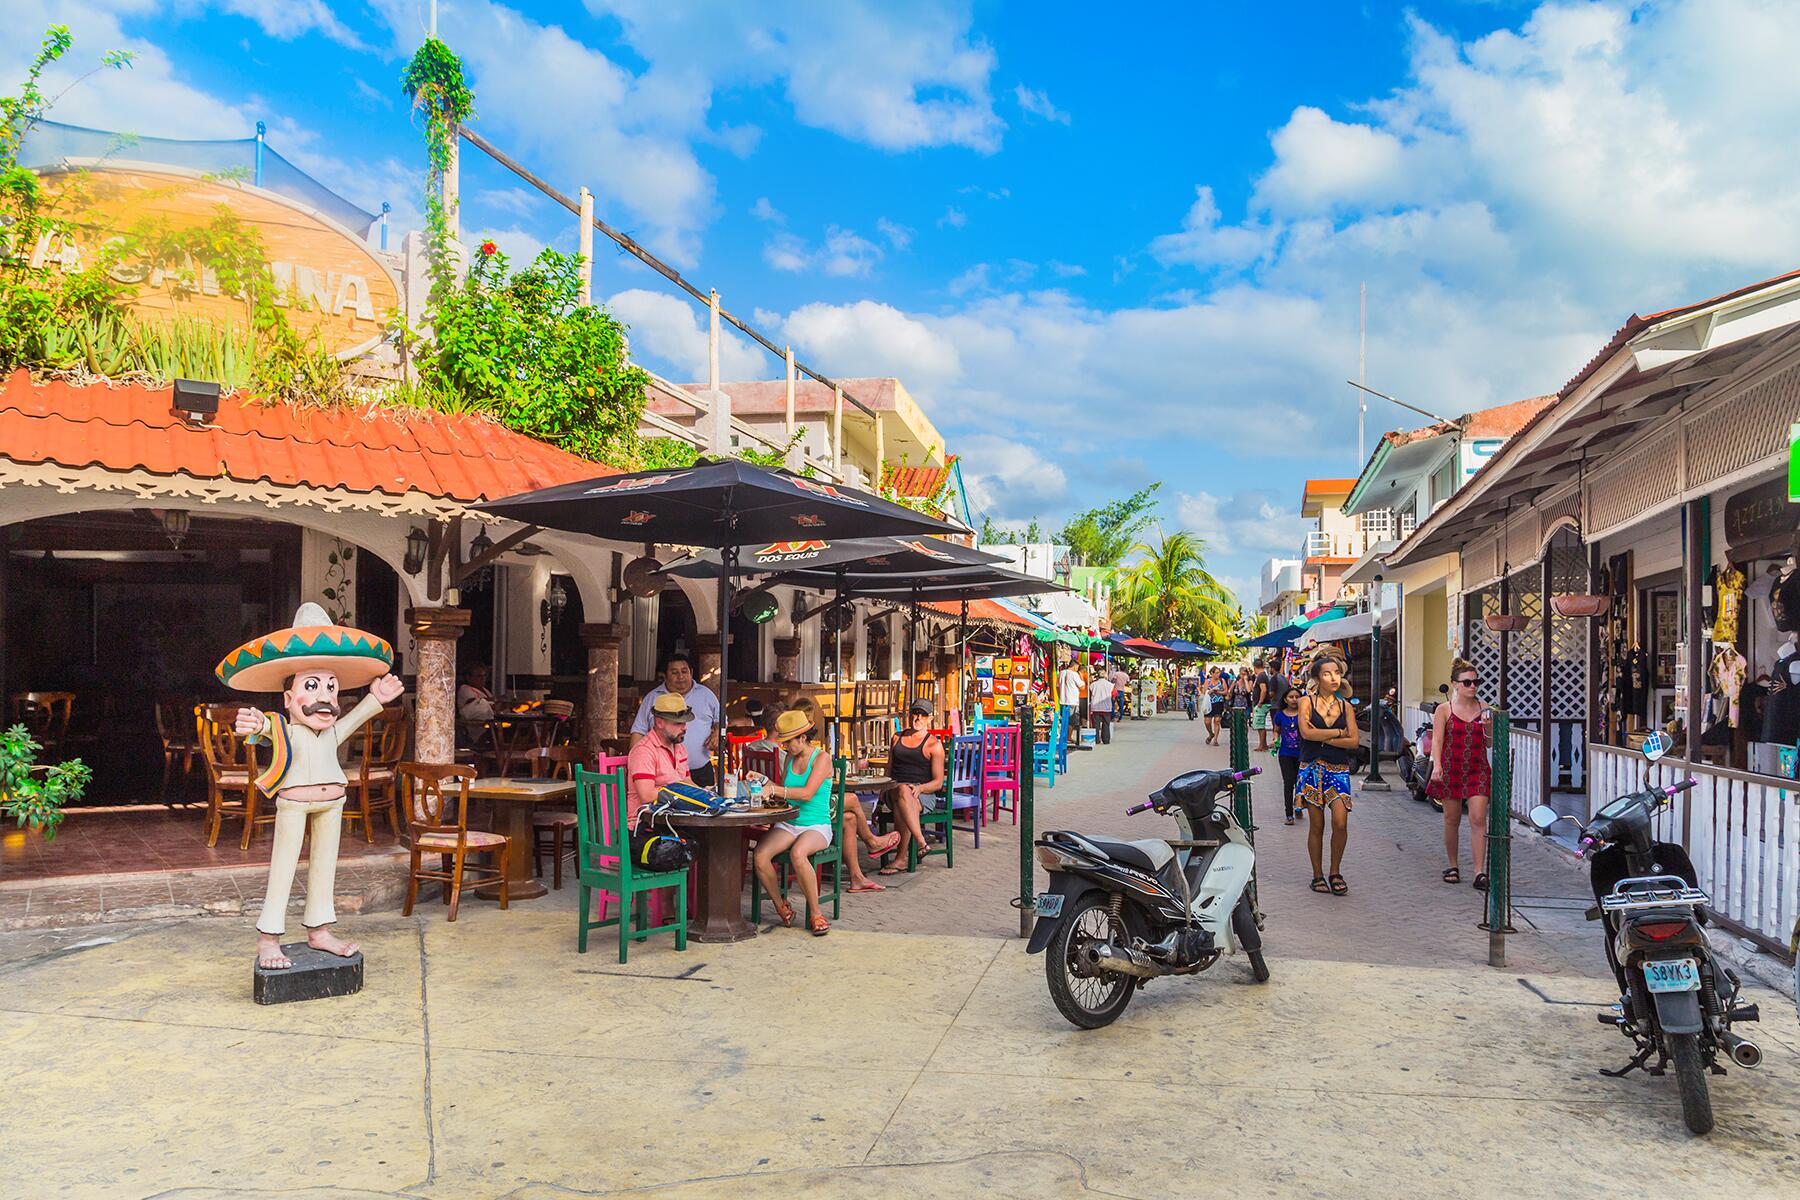 <a href='https://www.fodors.com/world/mexico-and-central-america/mexico/experiences/news/photos/should-i-take-a-cruise-on-mexican-caribbean-or-mexican-riviera#'>From &quot;Mexican Caribbean vs. Mexican Riviera: Which Destination Is Right for You?: What Small Towns to Visit&quot;</a>